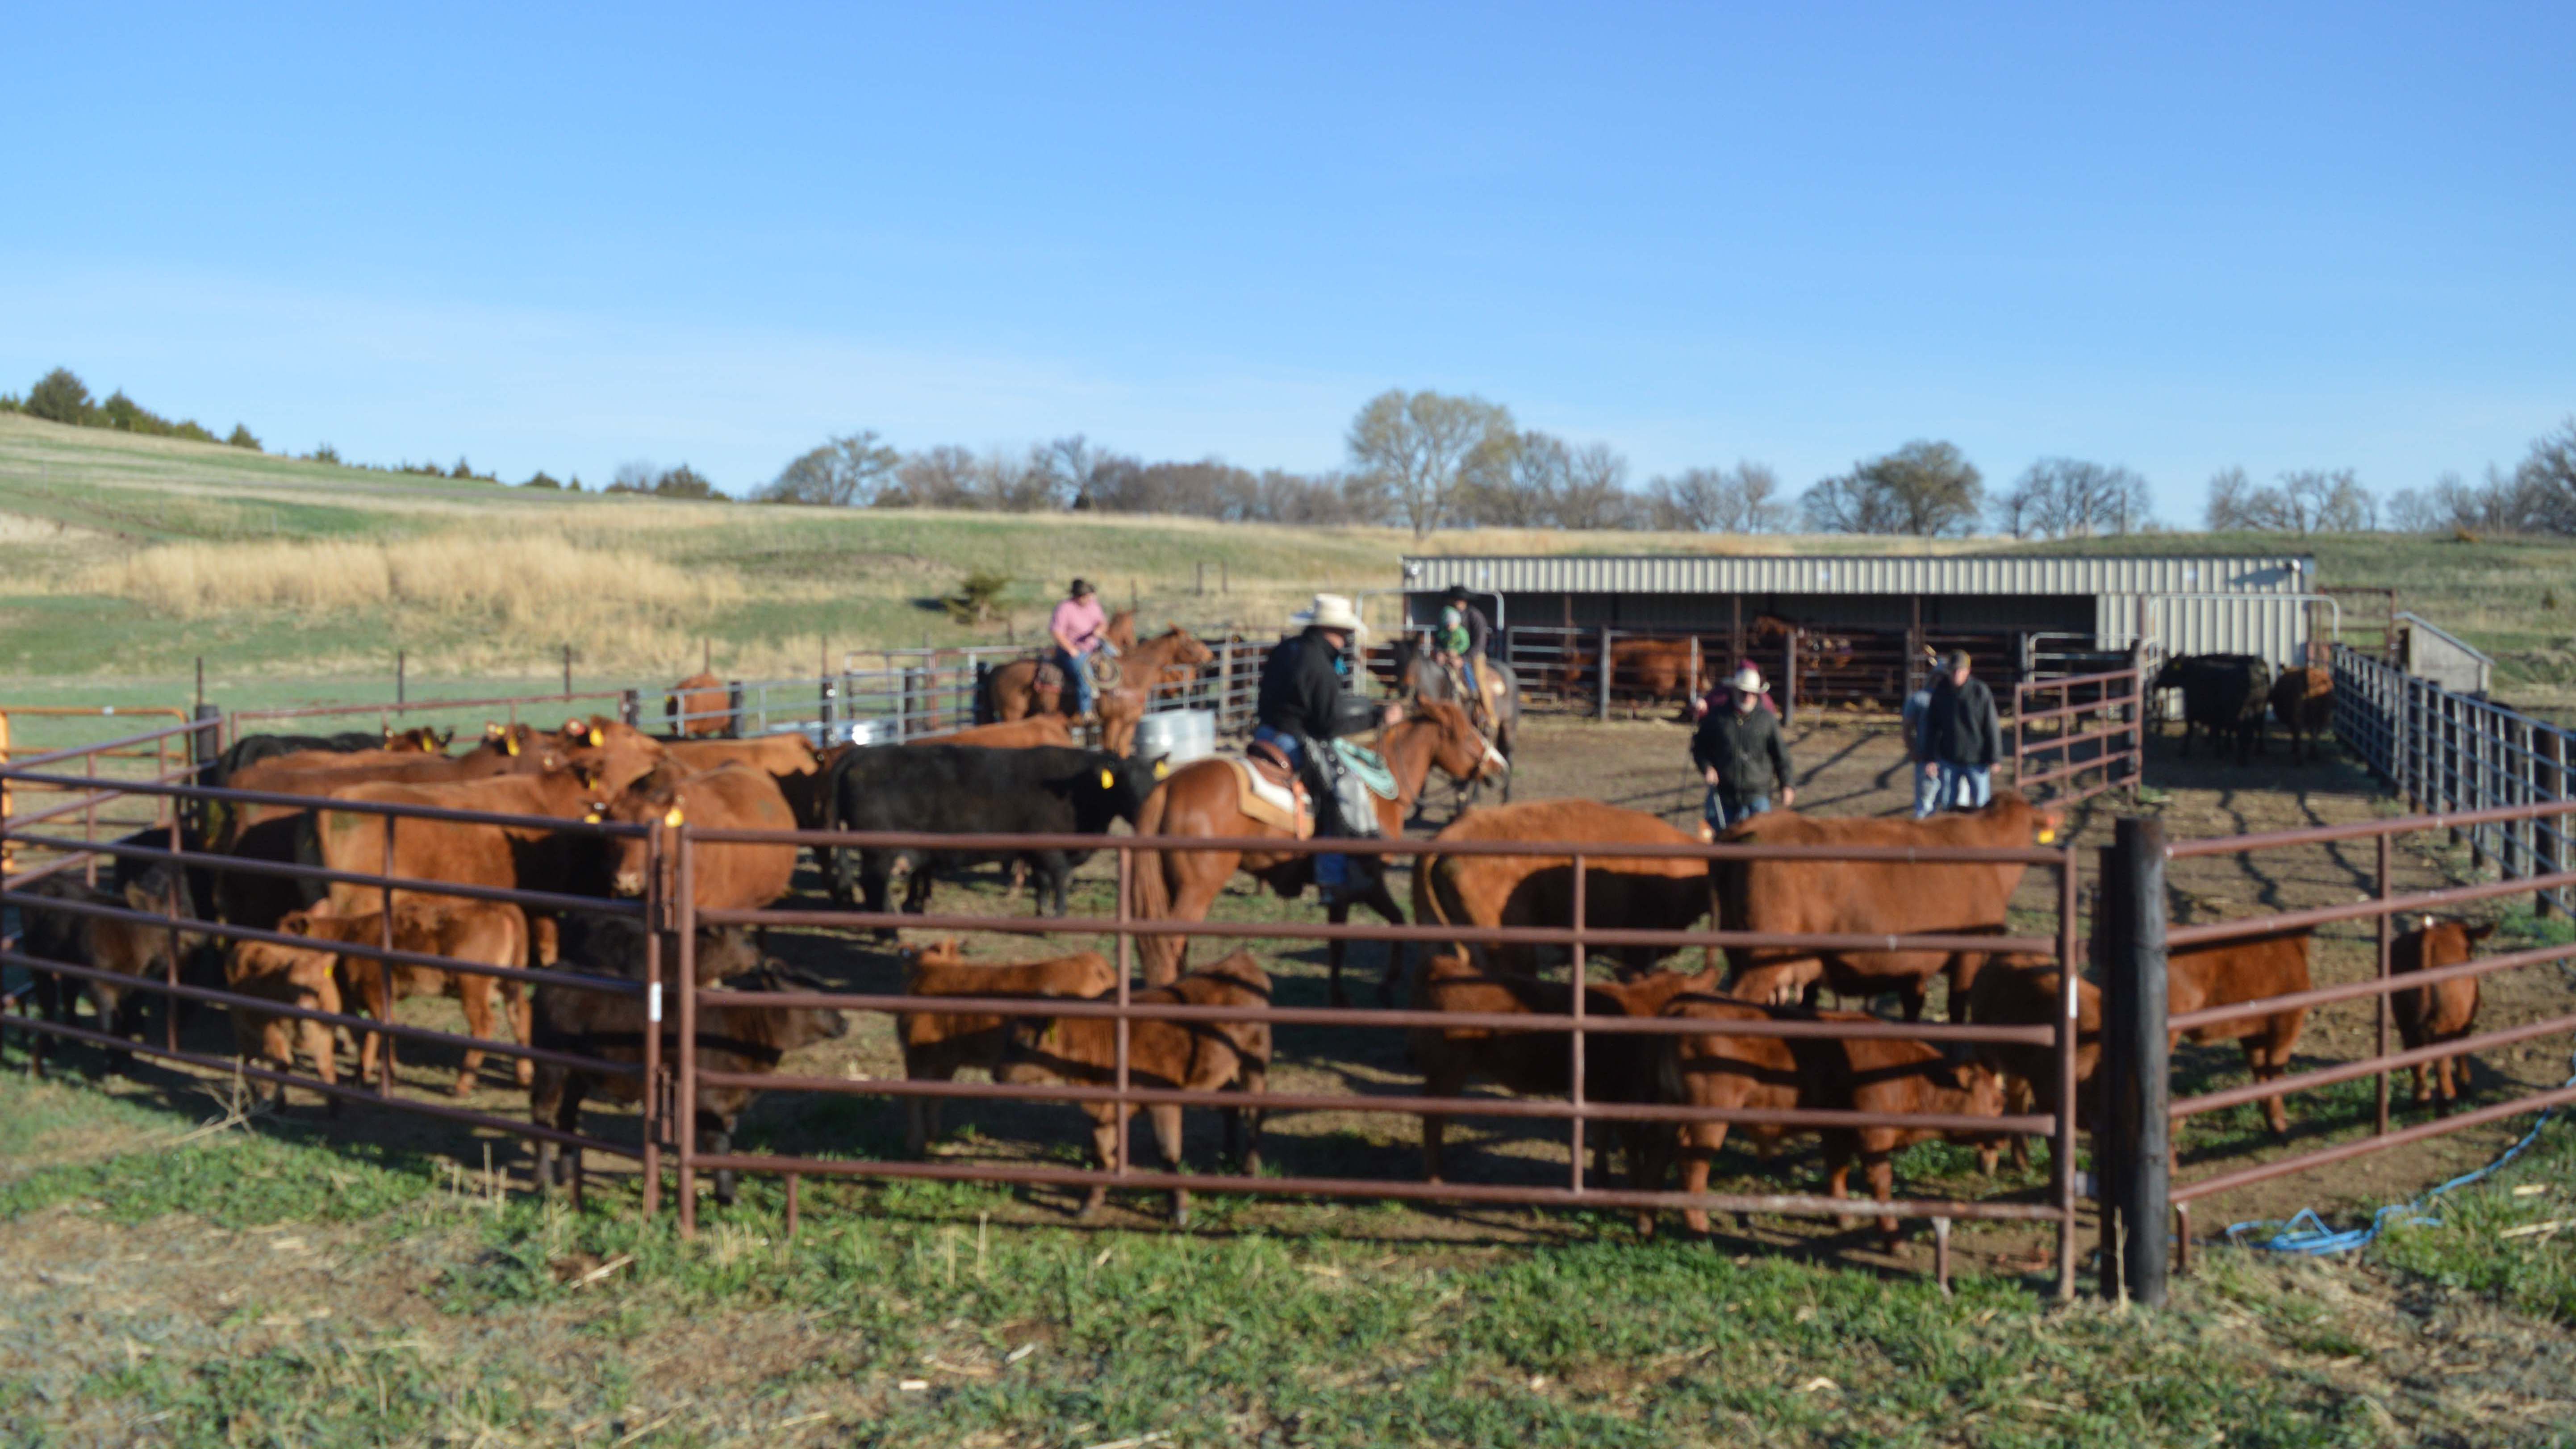 Roundup for branding spring calves at Aggieland, Nebraska College of Technical Agriculture. (Crawford / NCTA News)